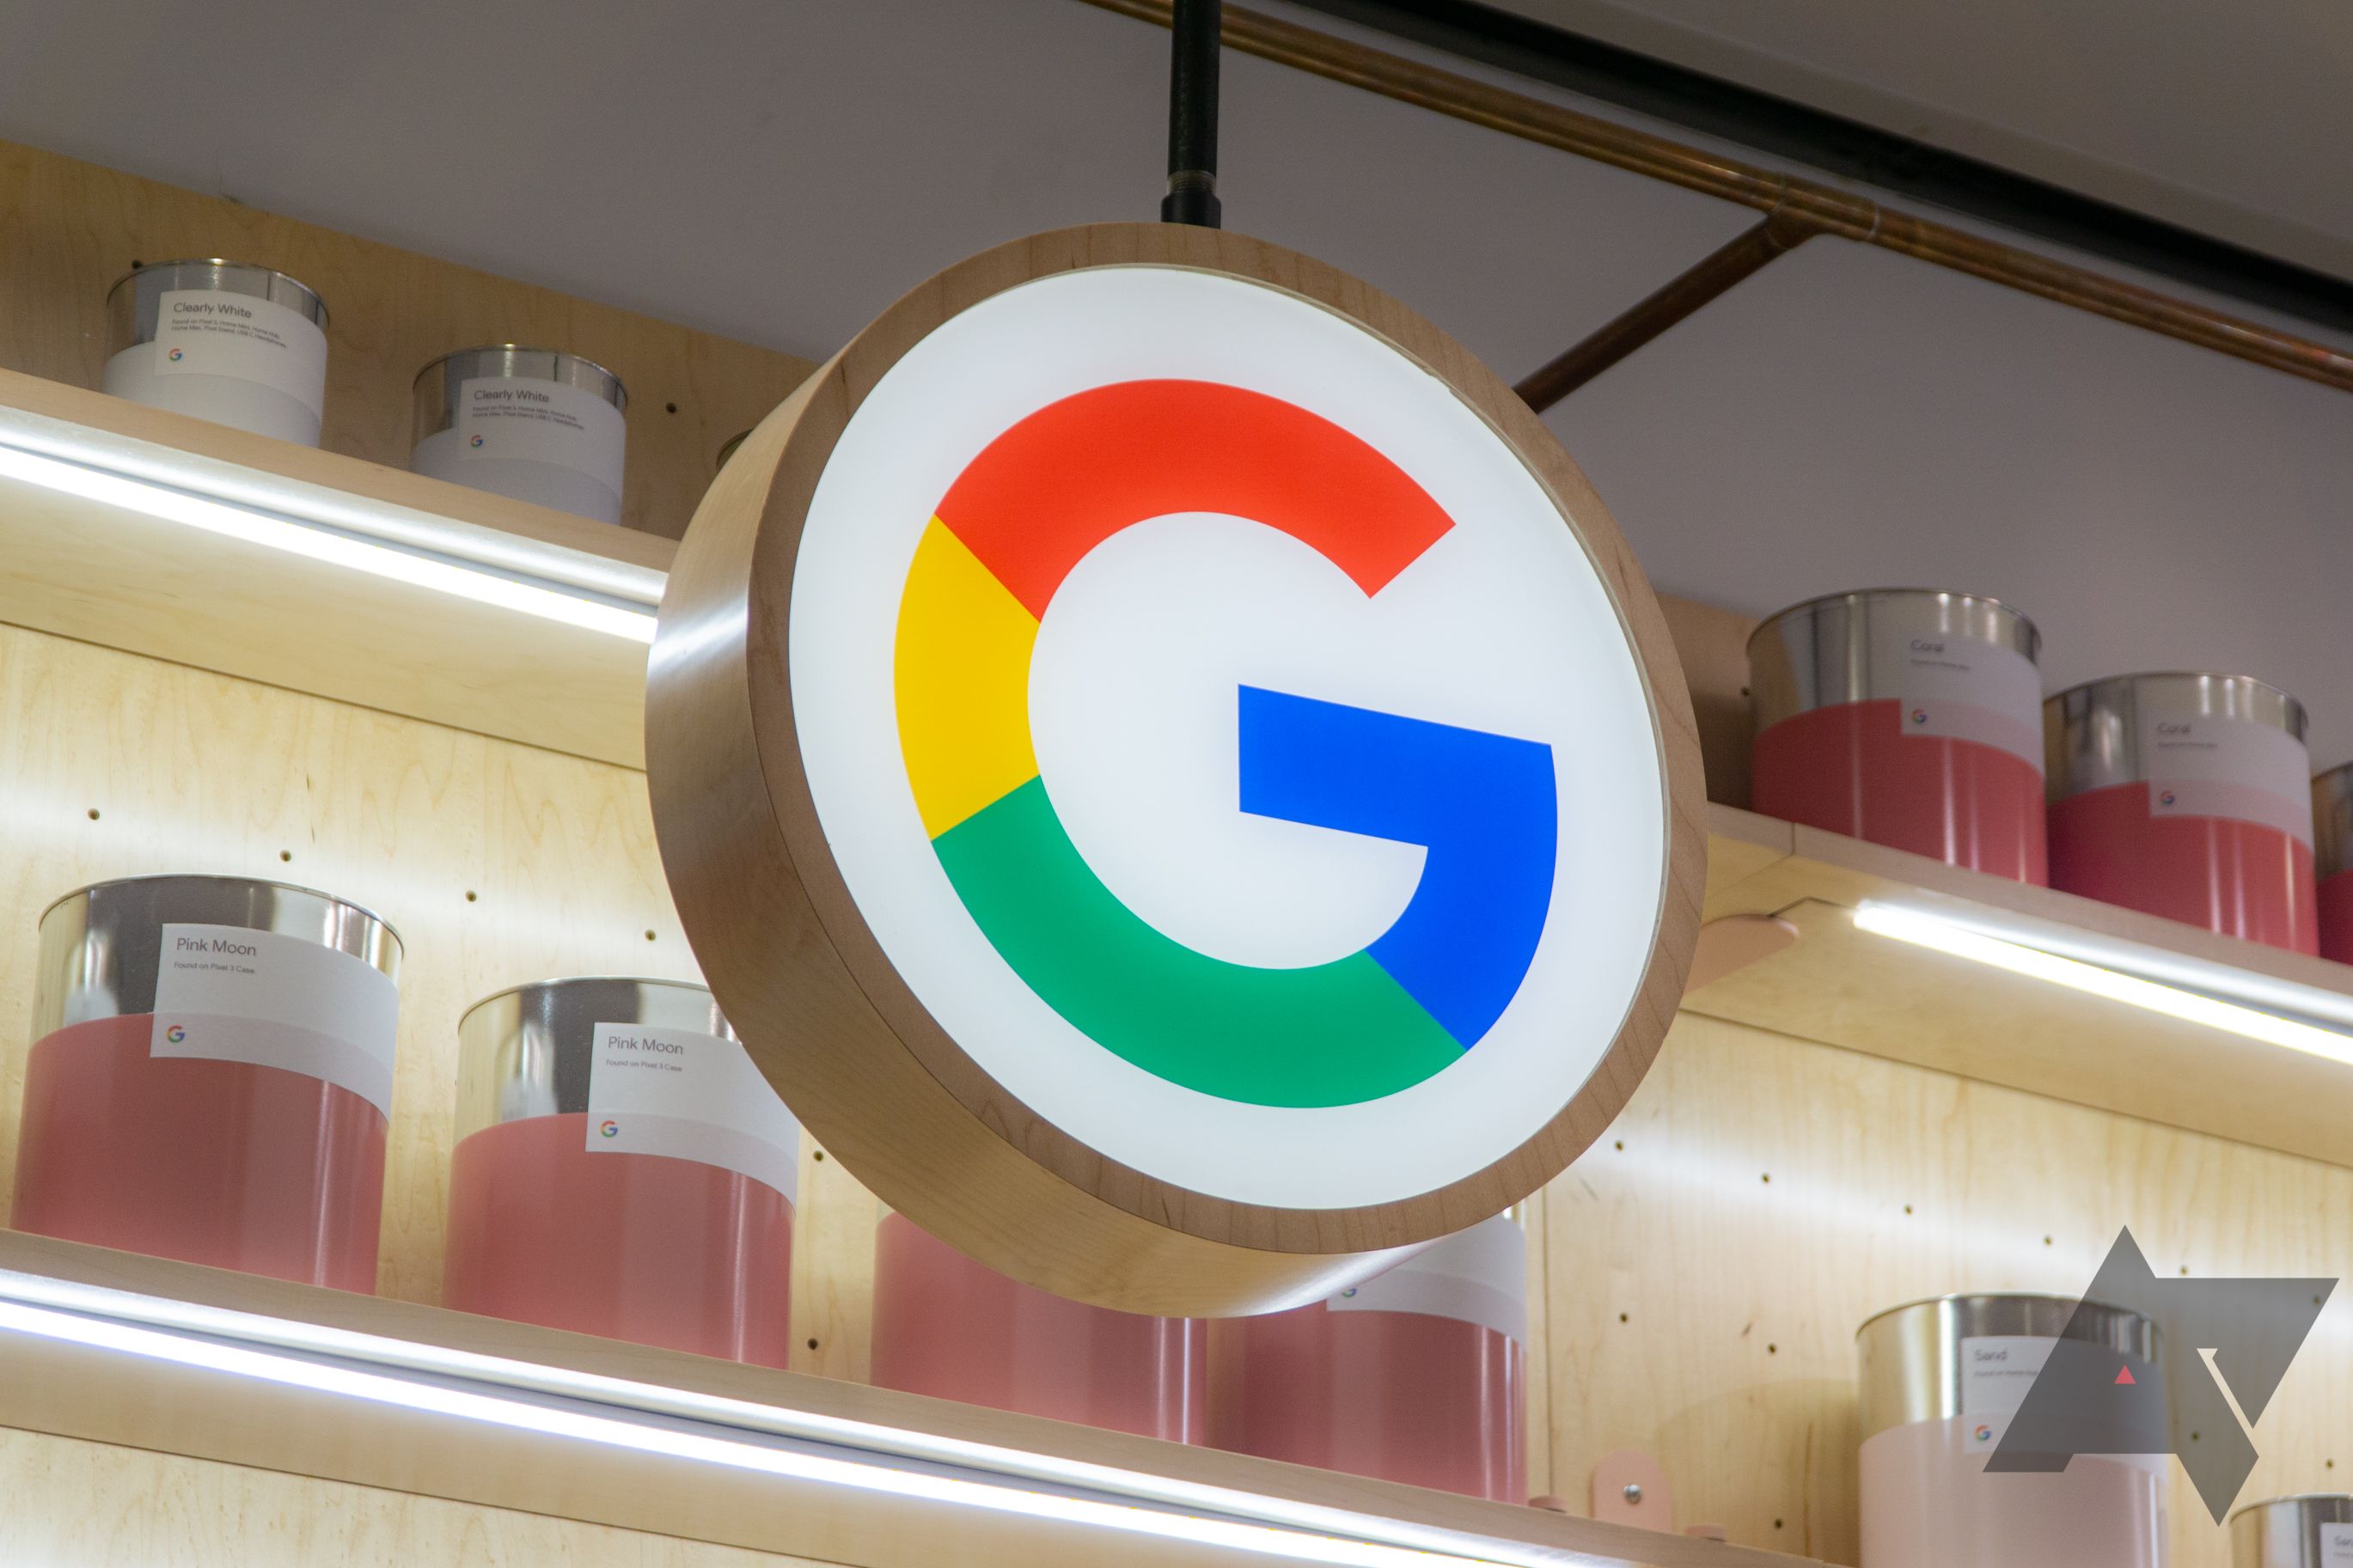 Google Reports Slow Growth In Q2 2022 Earnings As The Company Braces For An Economic Downturn